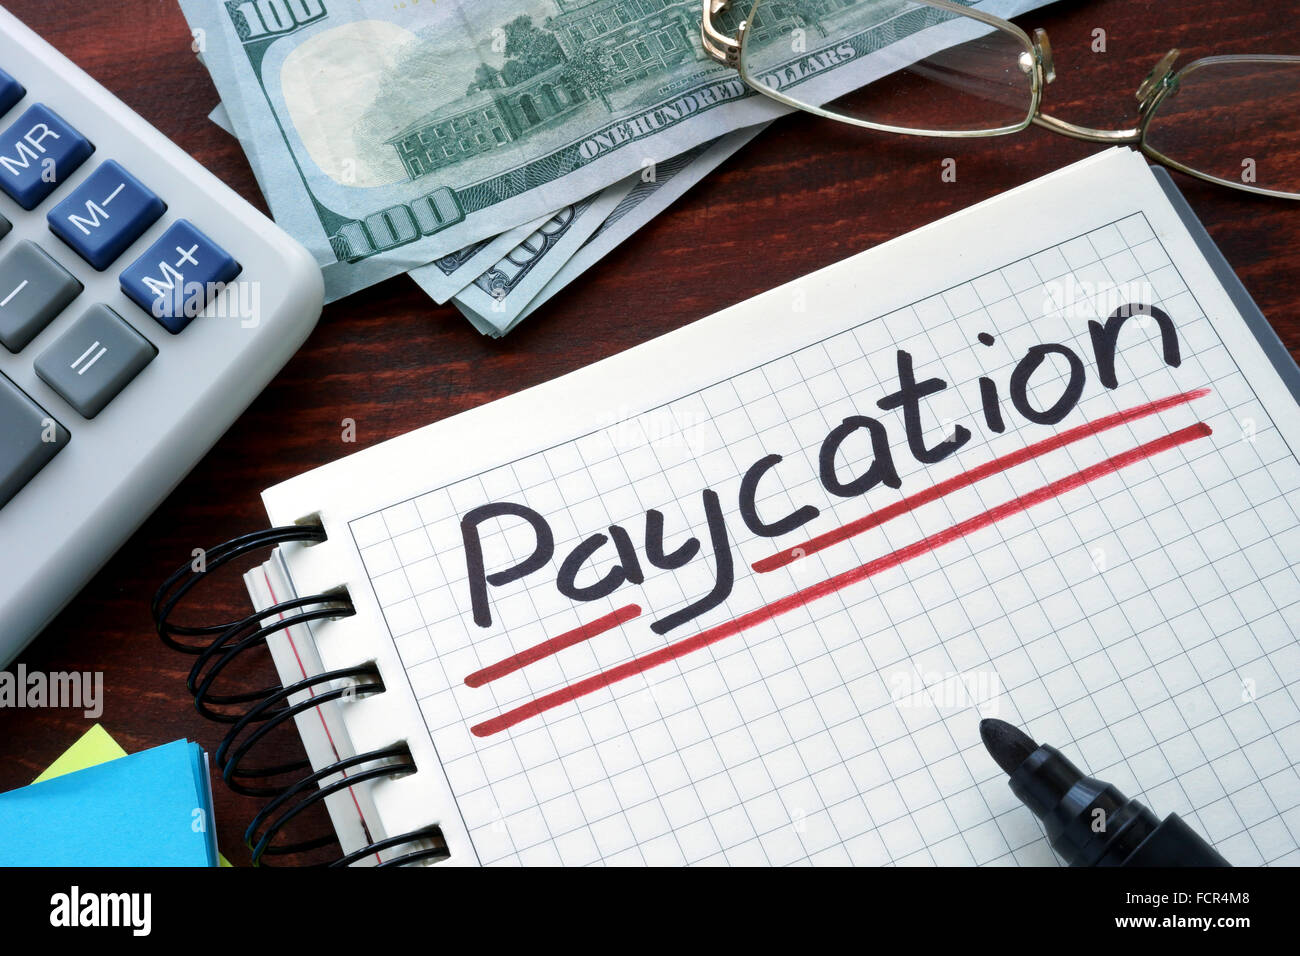 Paycation written on a notebook. Business concept. Stock Photo